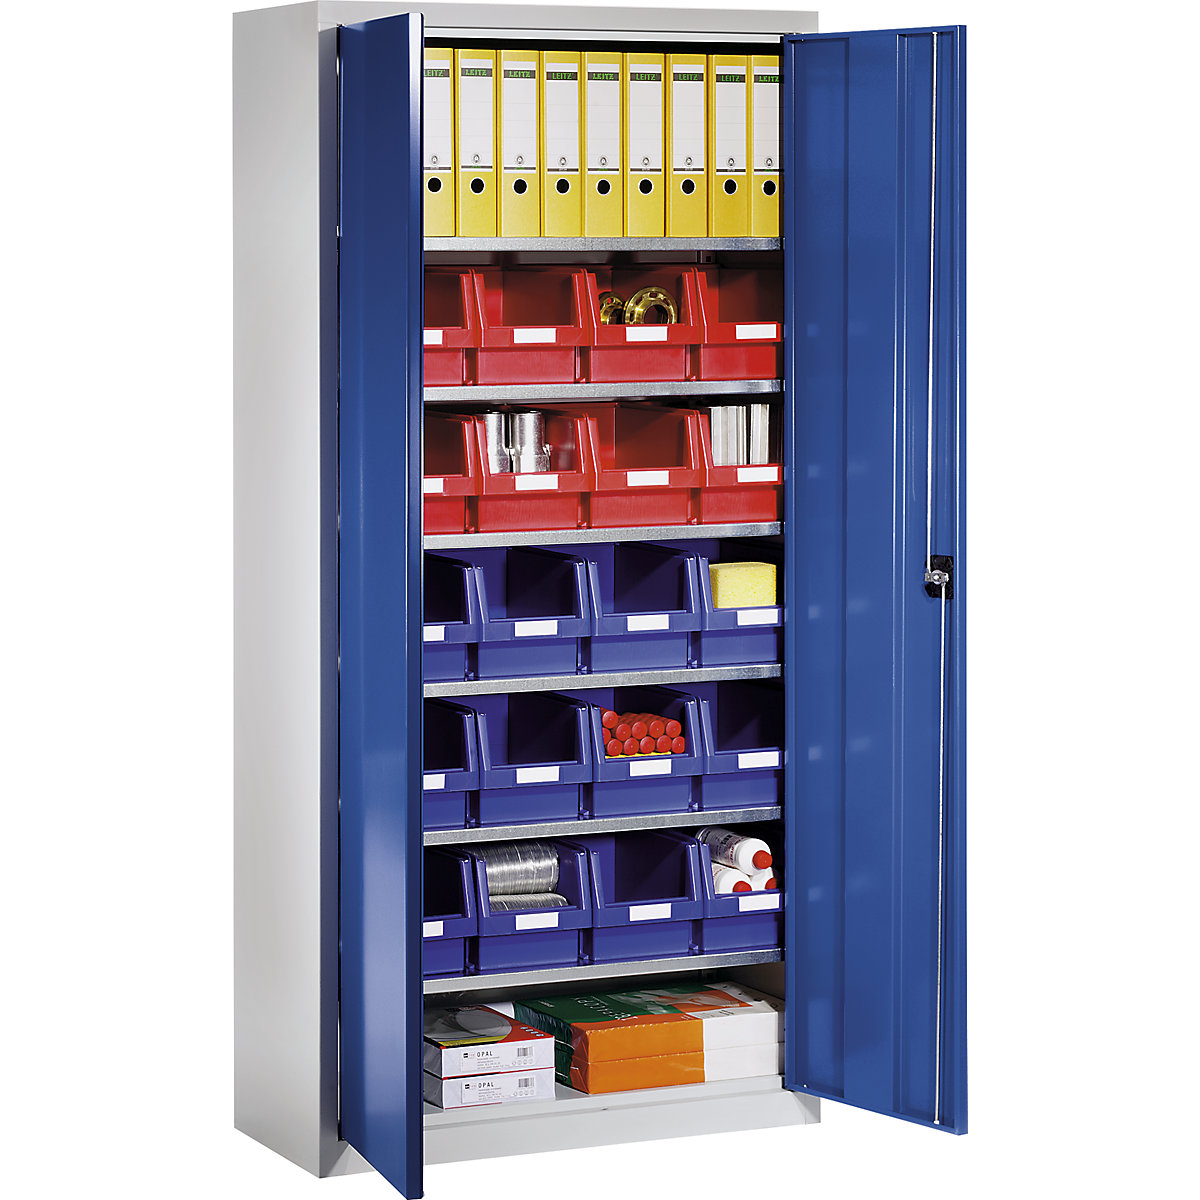 Storage cupboard made of sheet steel – eurokraft pro, with 20 open fronted storage bins, light grey RAL 7035 / gentian blue RAL 5010-4